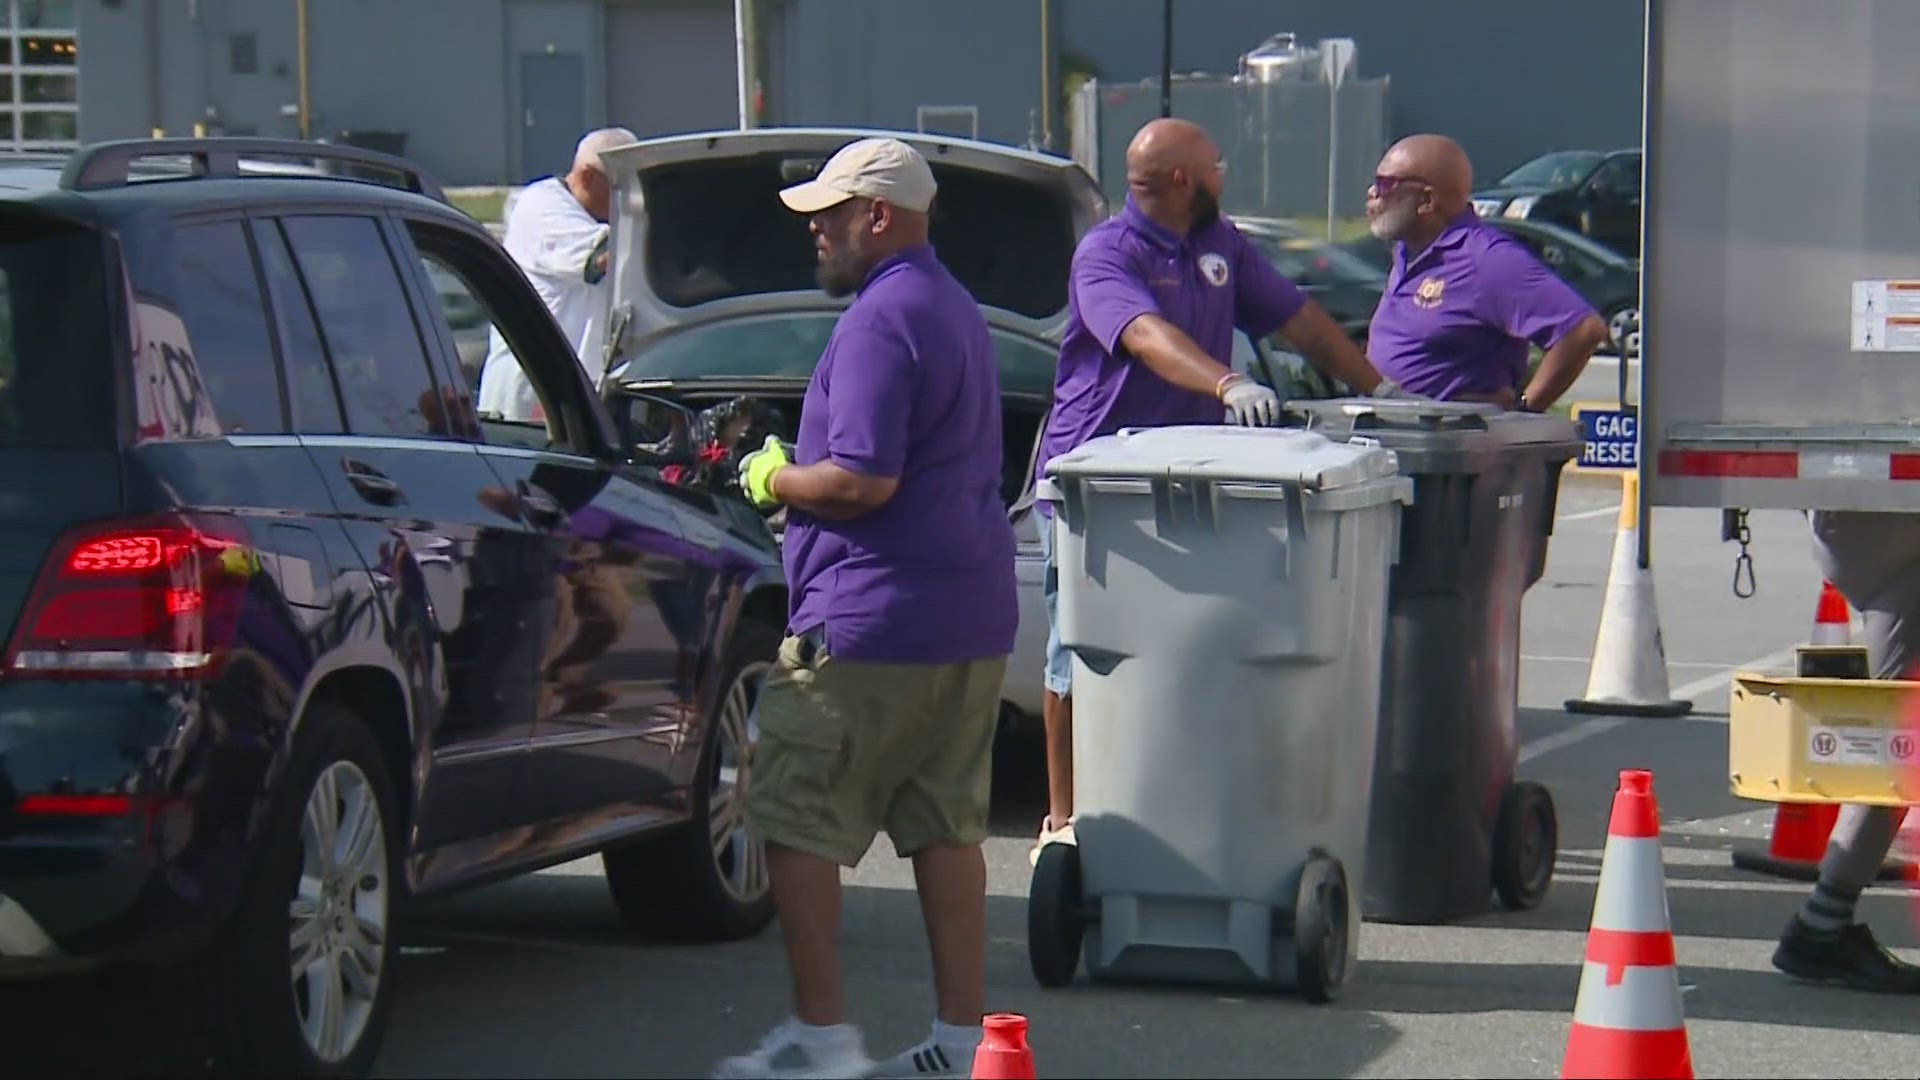 Team coverage brings you an inside look into this year's WFMY News 2 Shred-A-Thon.